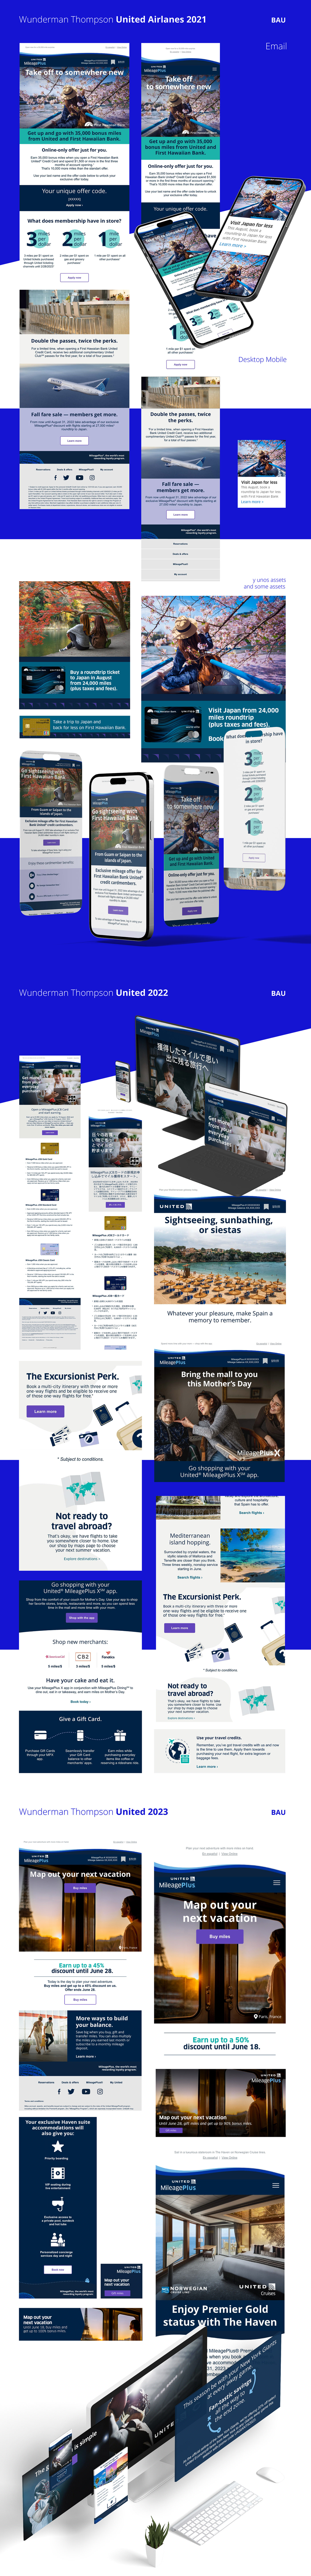 United Airlines branding  Production mailing Email